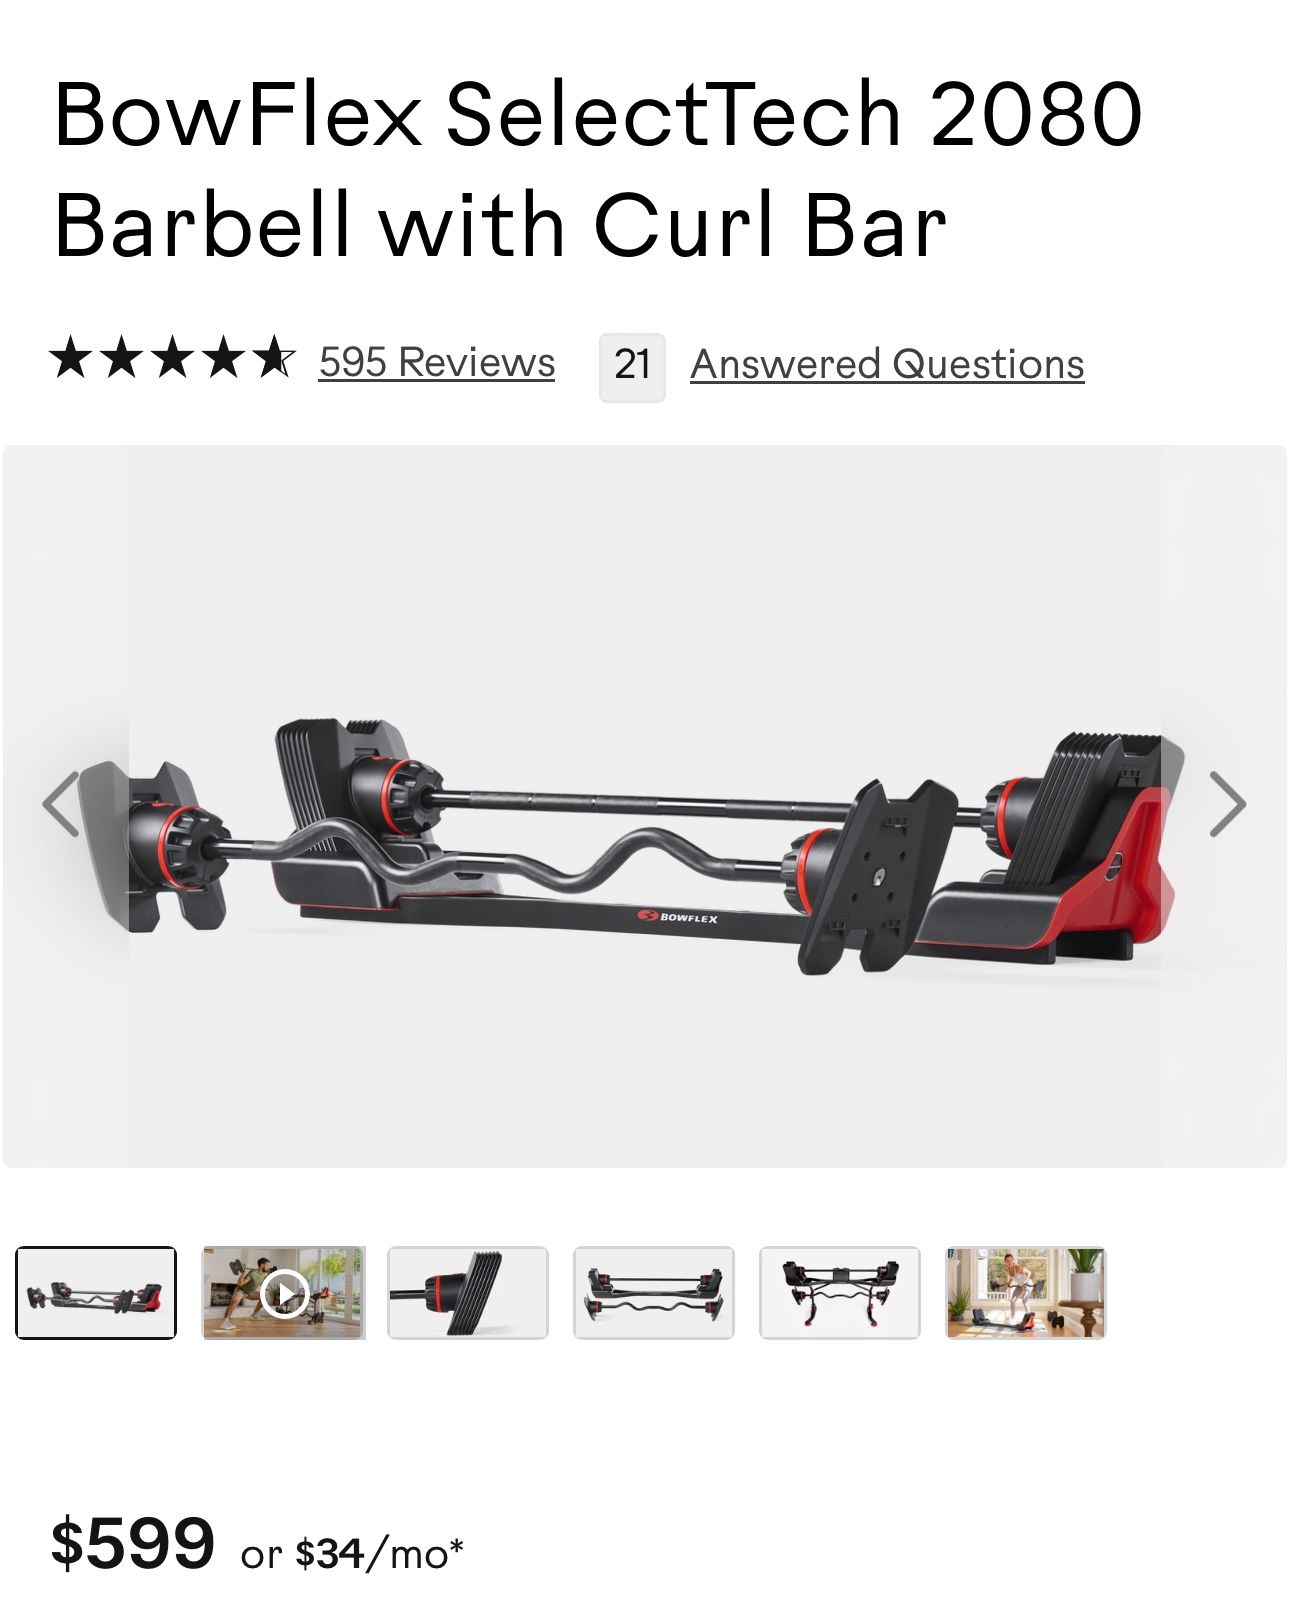 BowFlex SelectTech 2080 Barbell with Curl Bar with additional weight